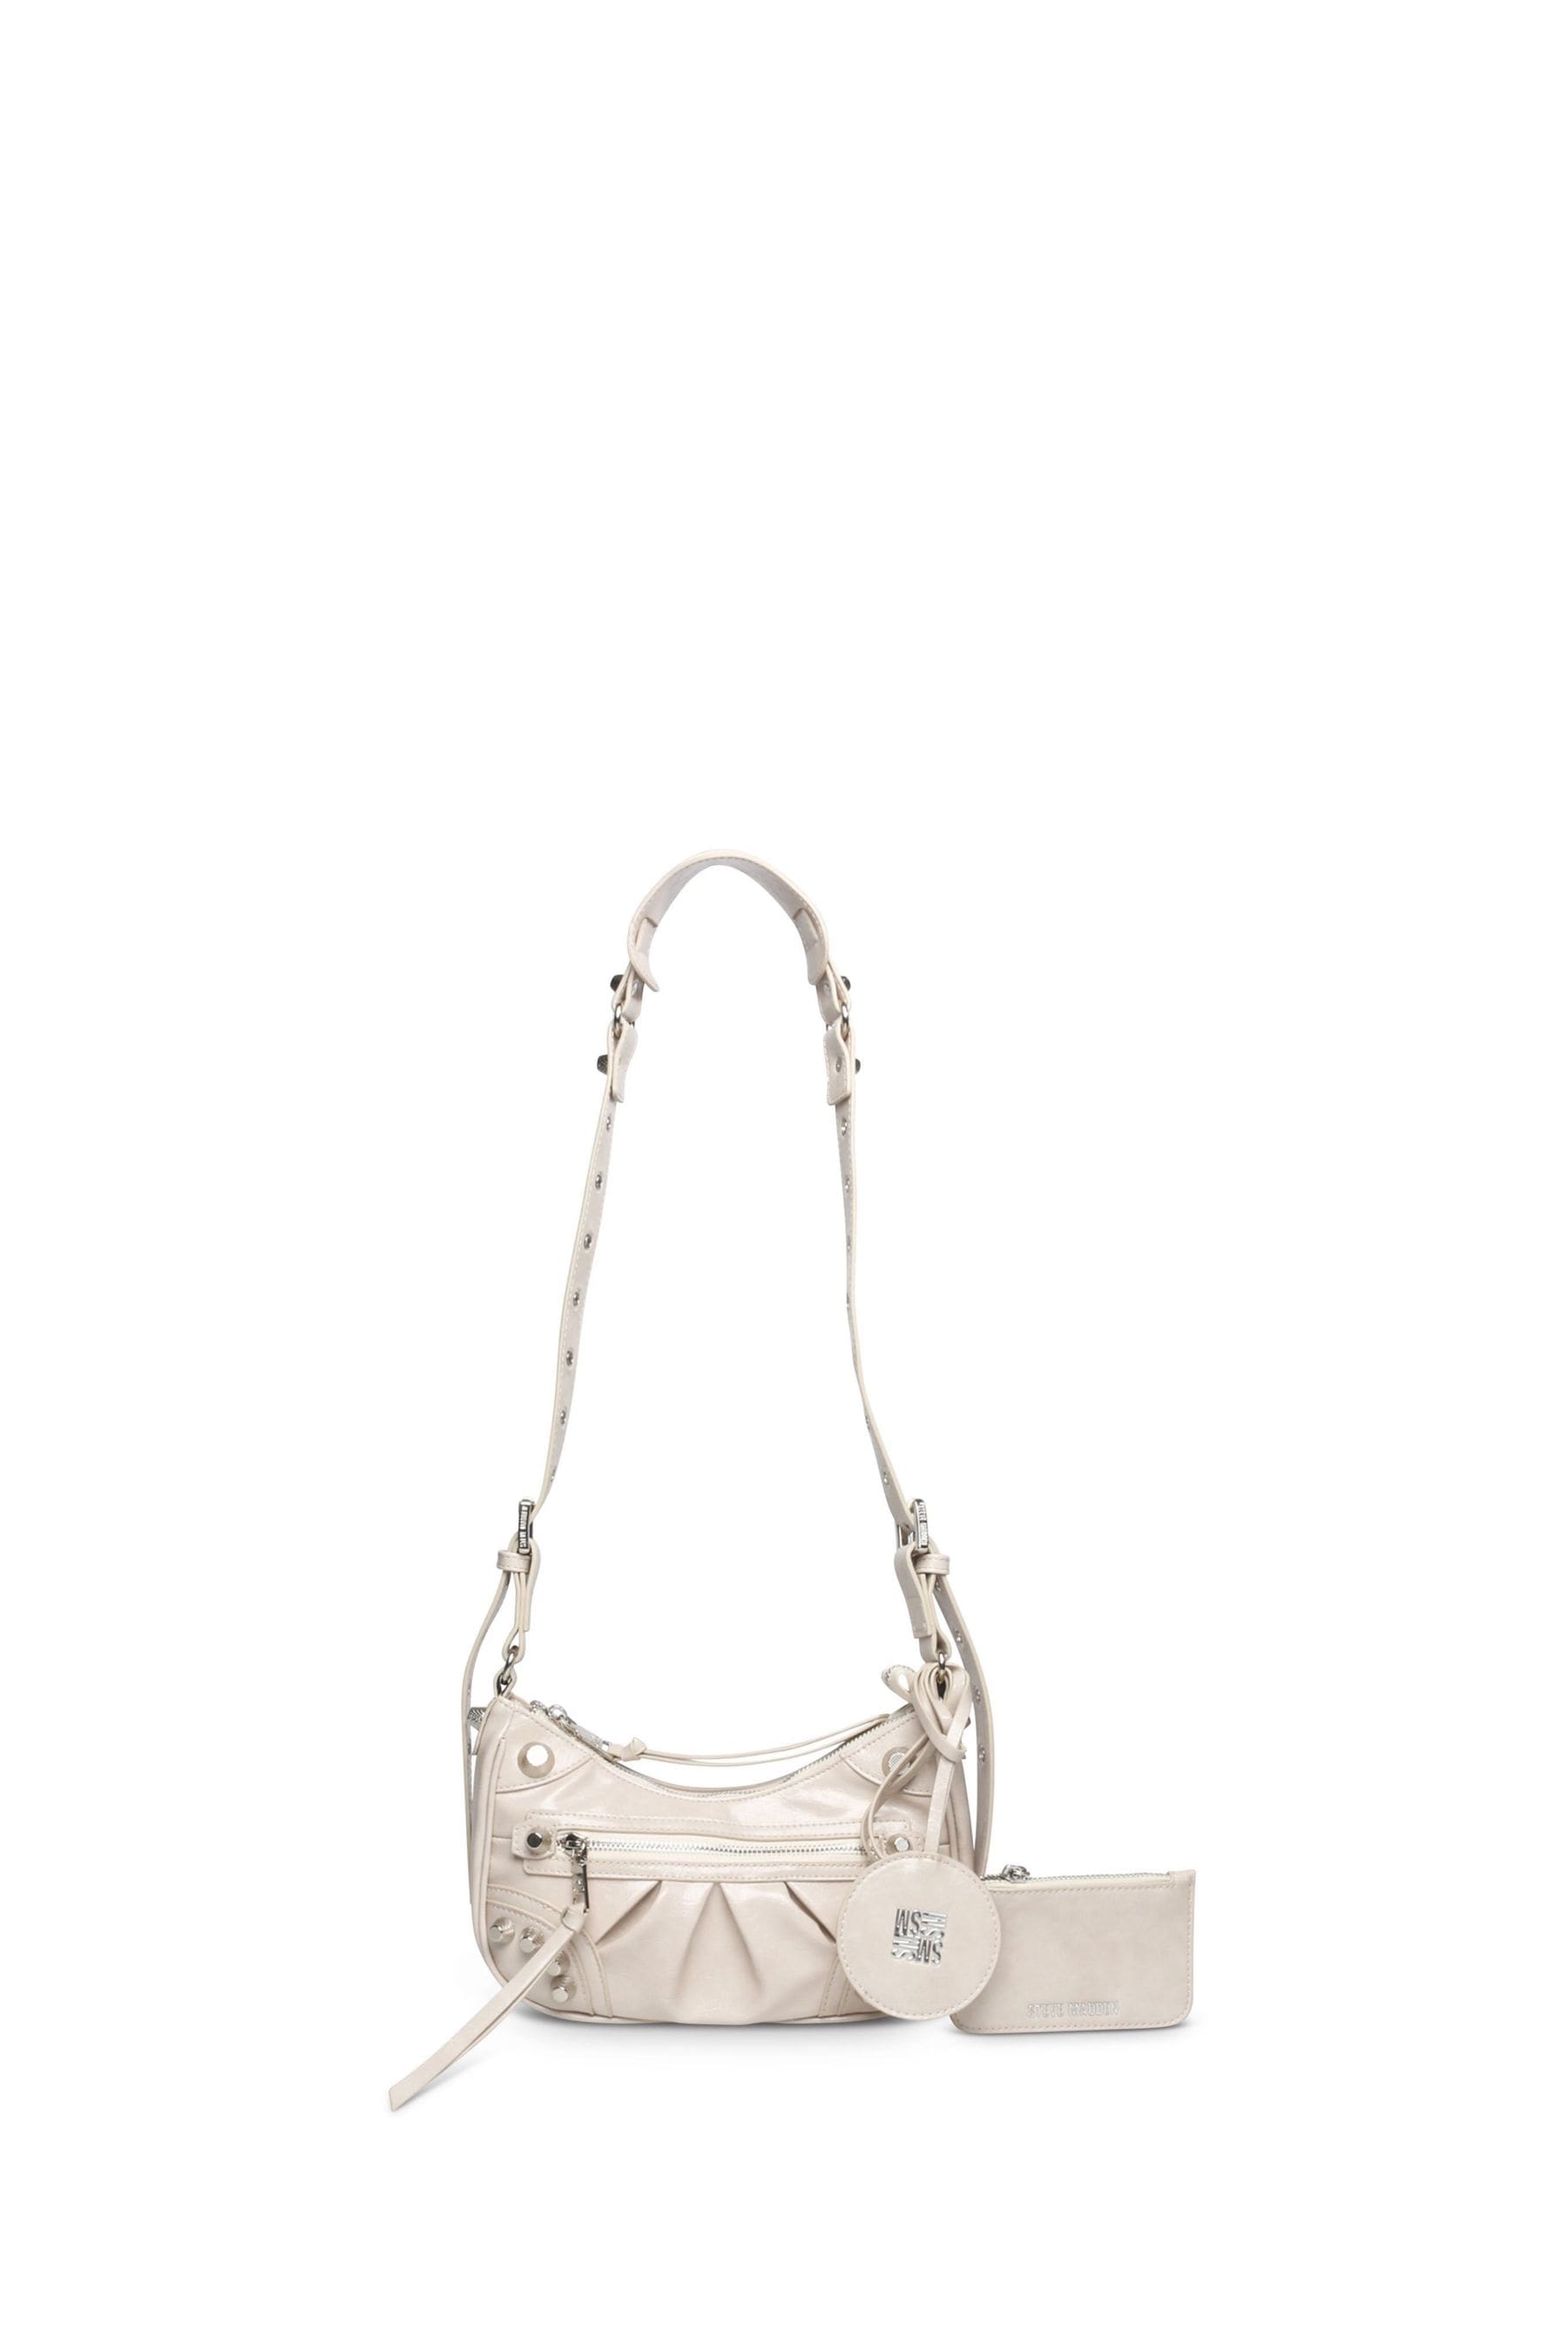 Buy Steve Madden Glowing Cross-Body Bag from the Next UK online shop